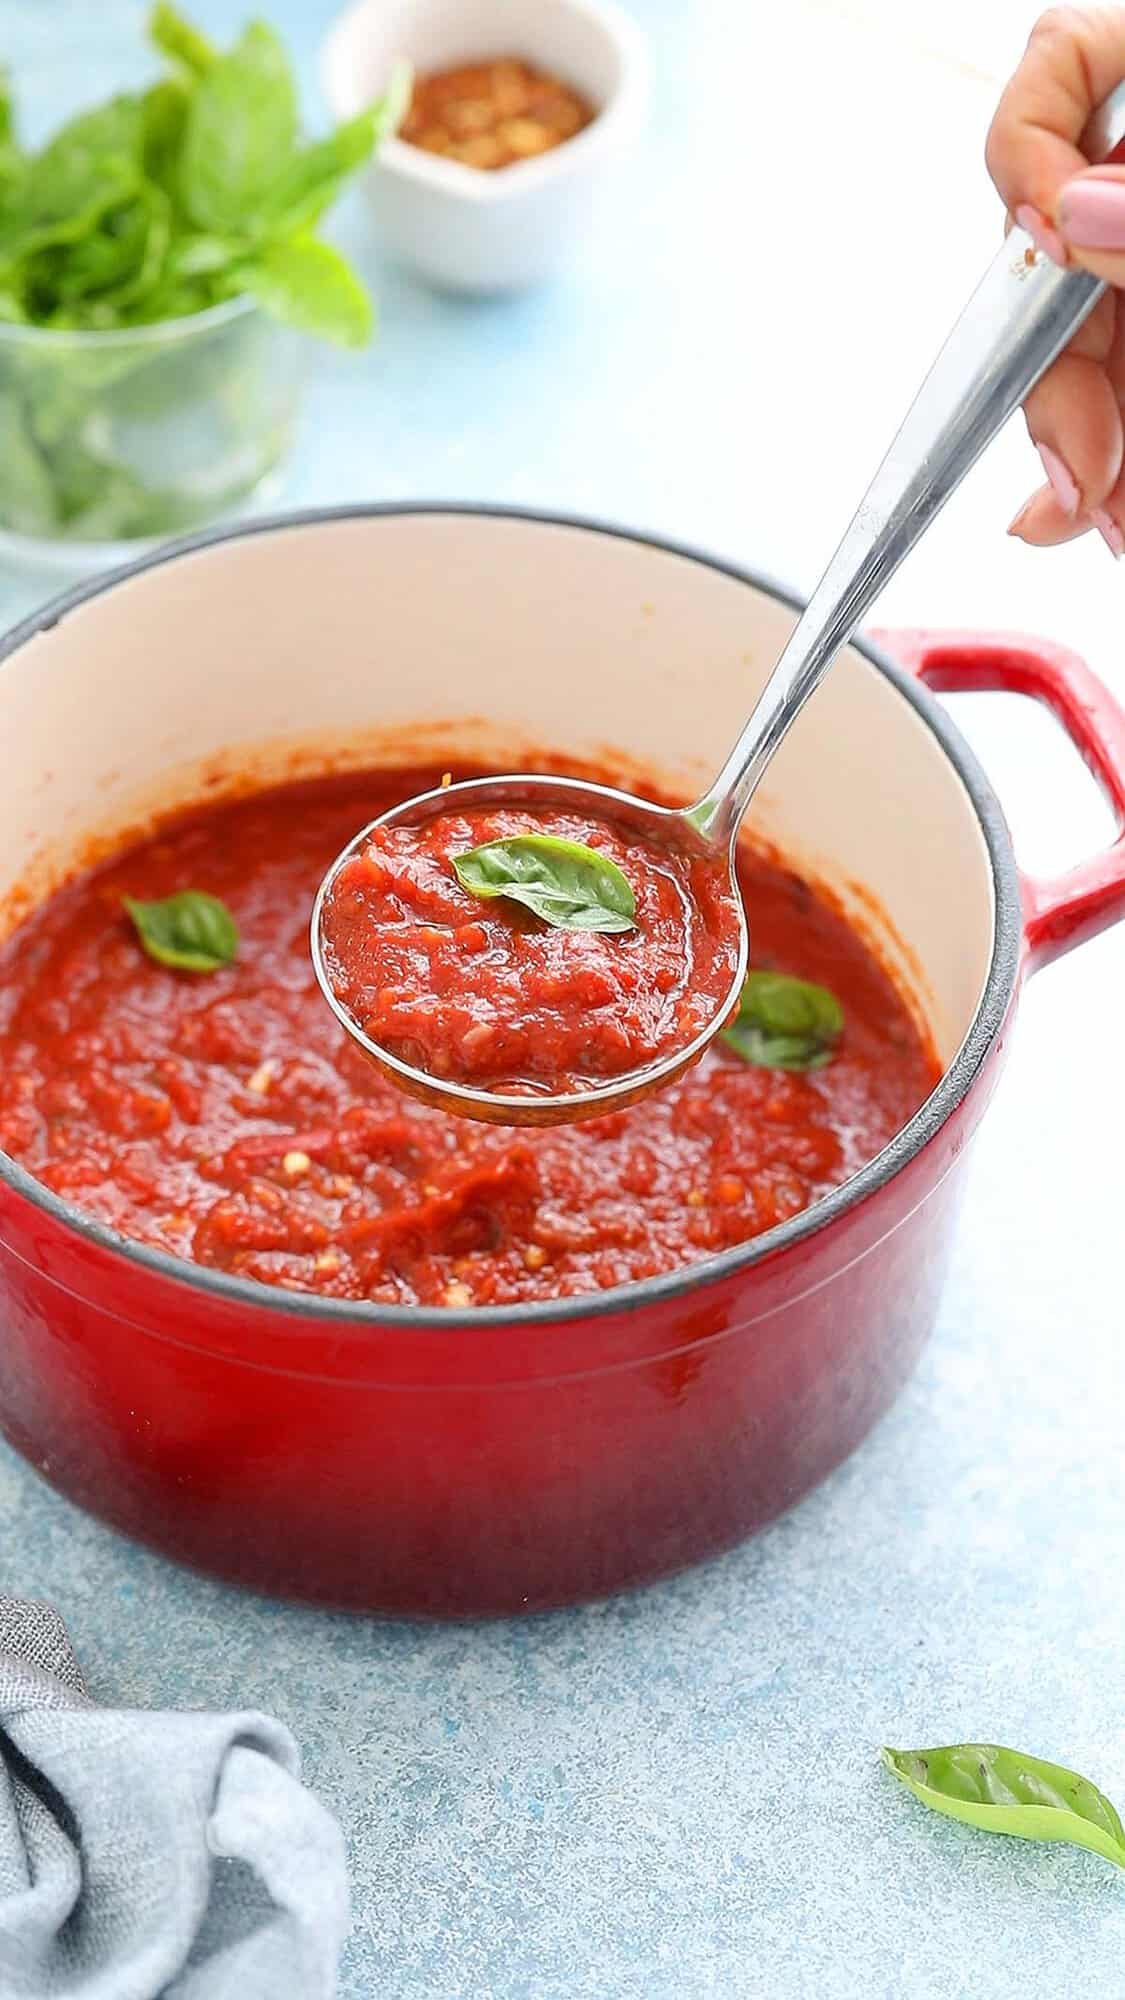 a hand lifting a ladle full of red sauce garnished with a basil leaf.